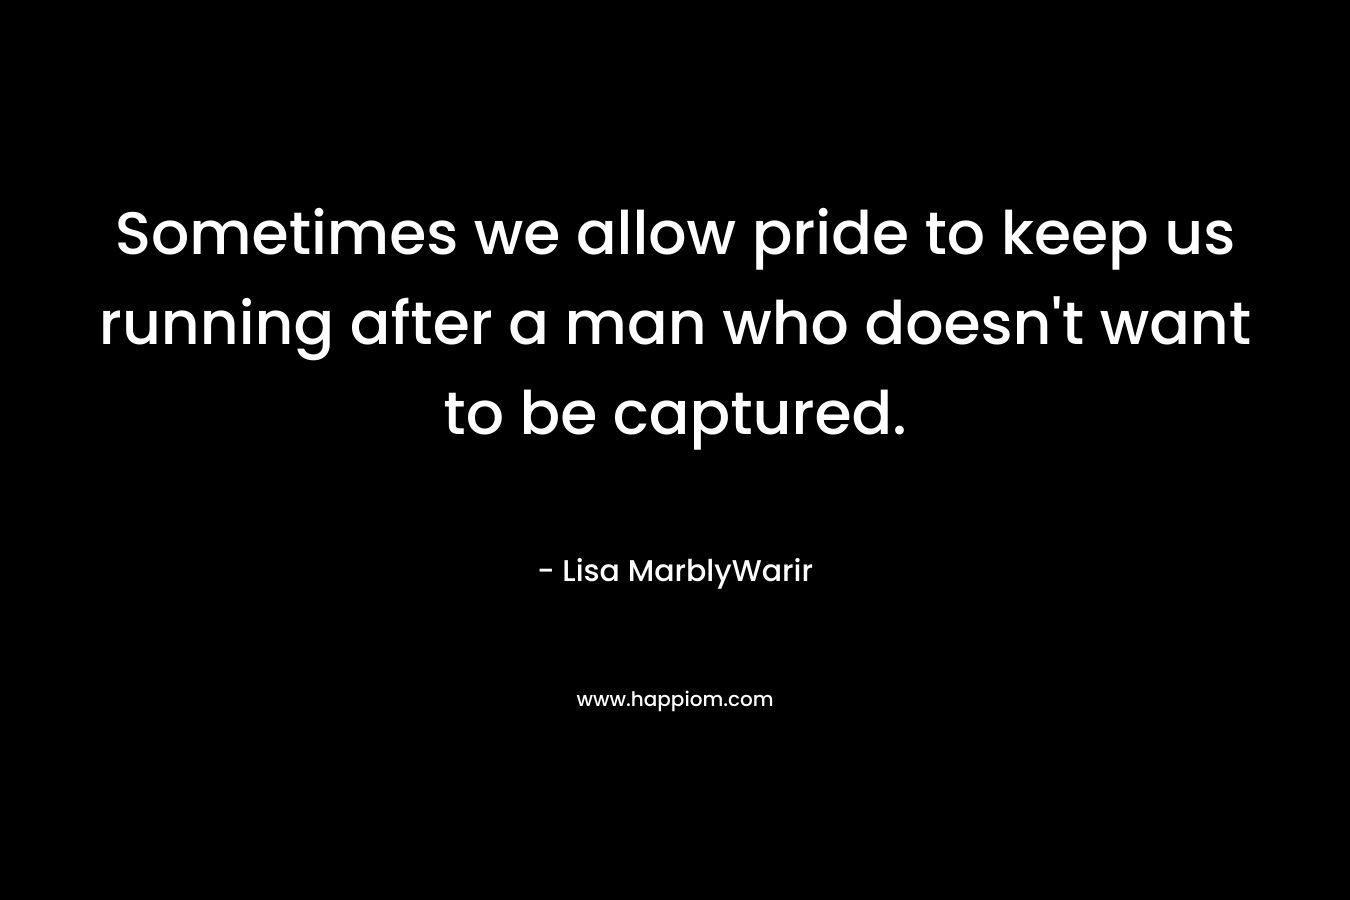 Sometimes we allow pride to keep us running after a man who doesn’t want to be captured. – Lisa MarblyWarir